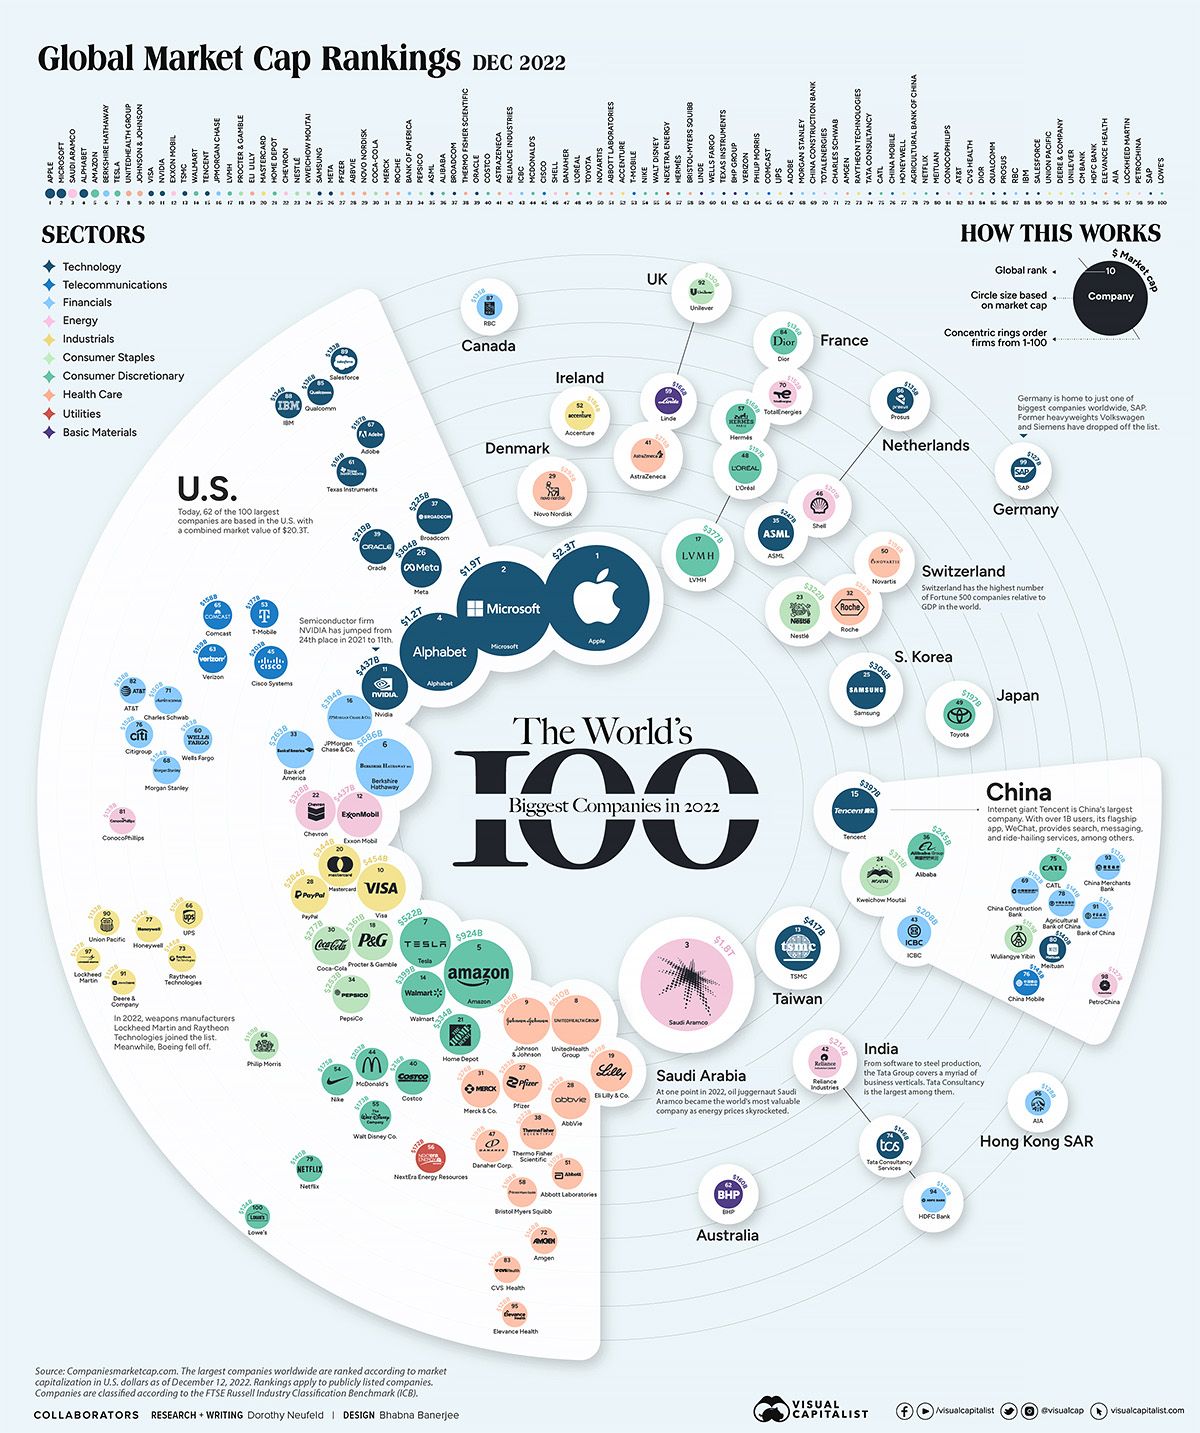 100 Biggest Companies in the World